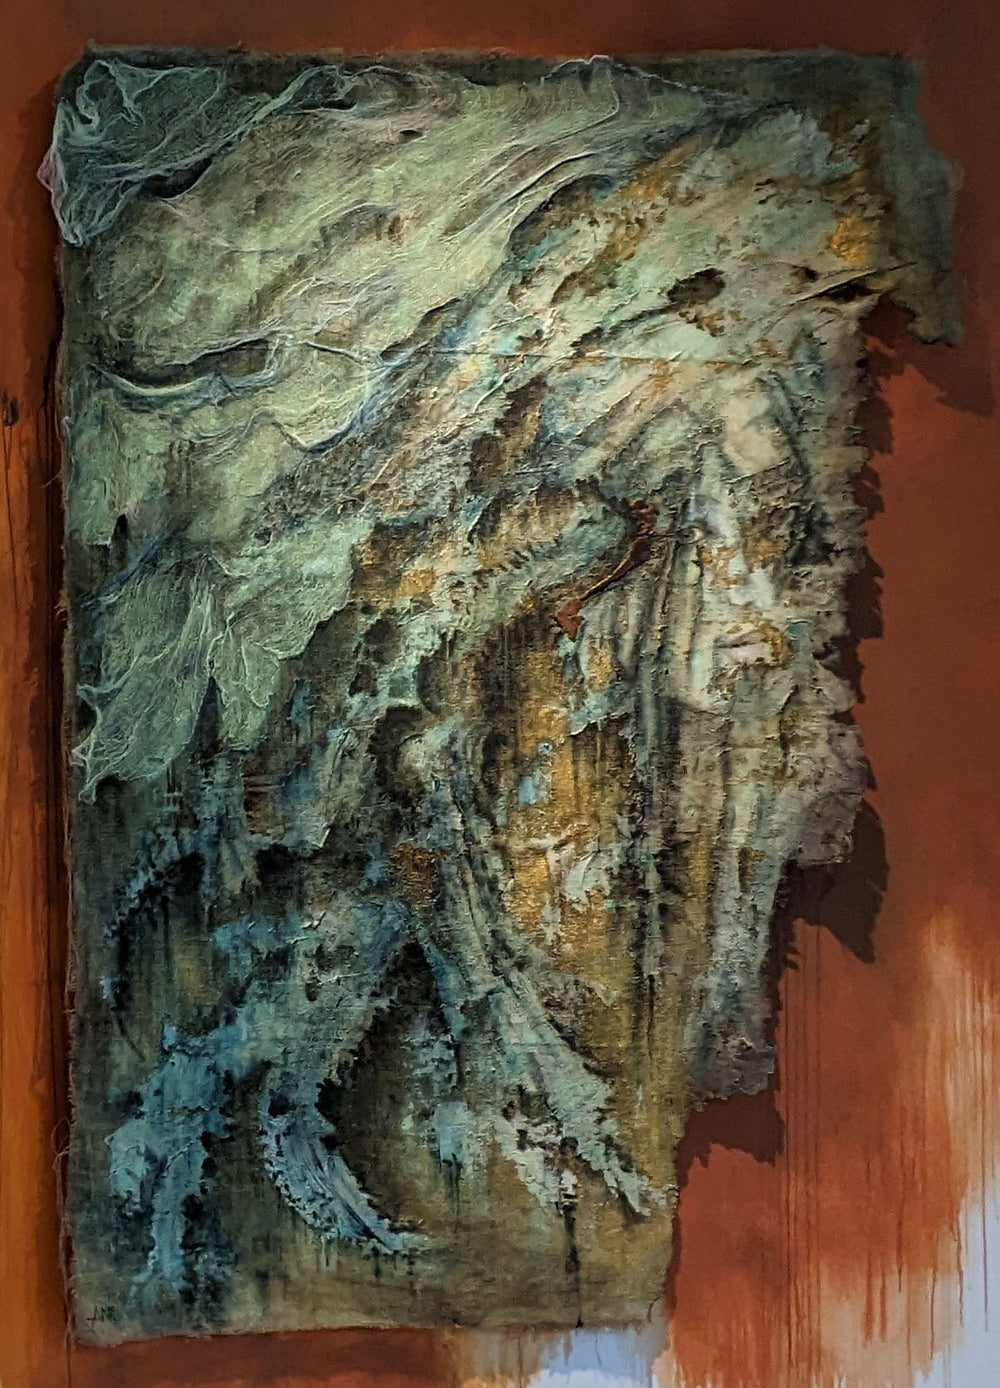 expressionistic painting filled with green and brown hues; hidden in the painting is a portrait